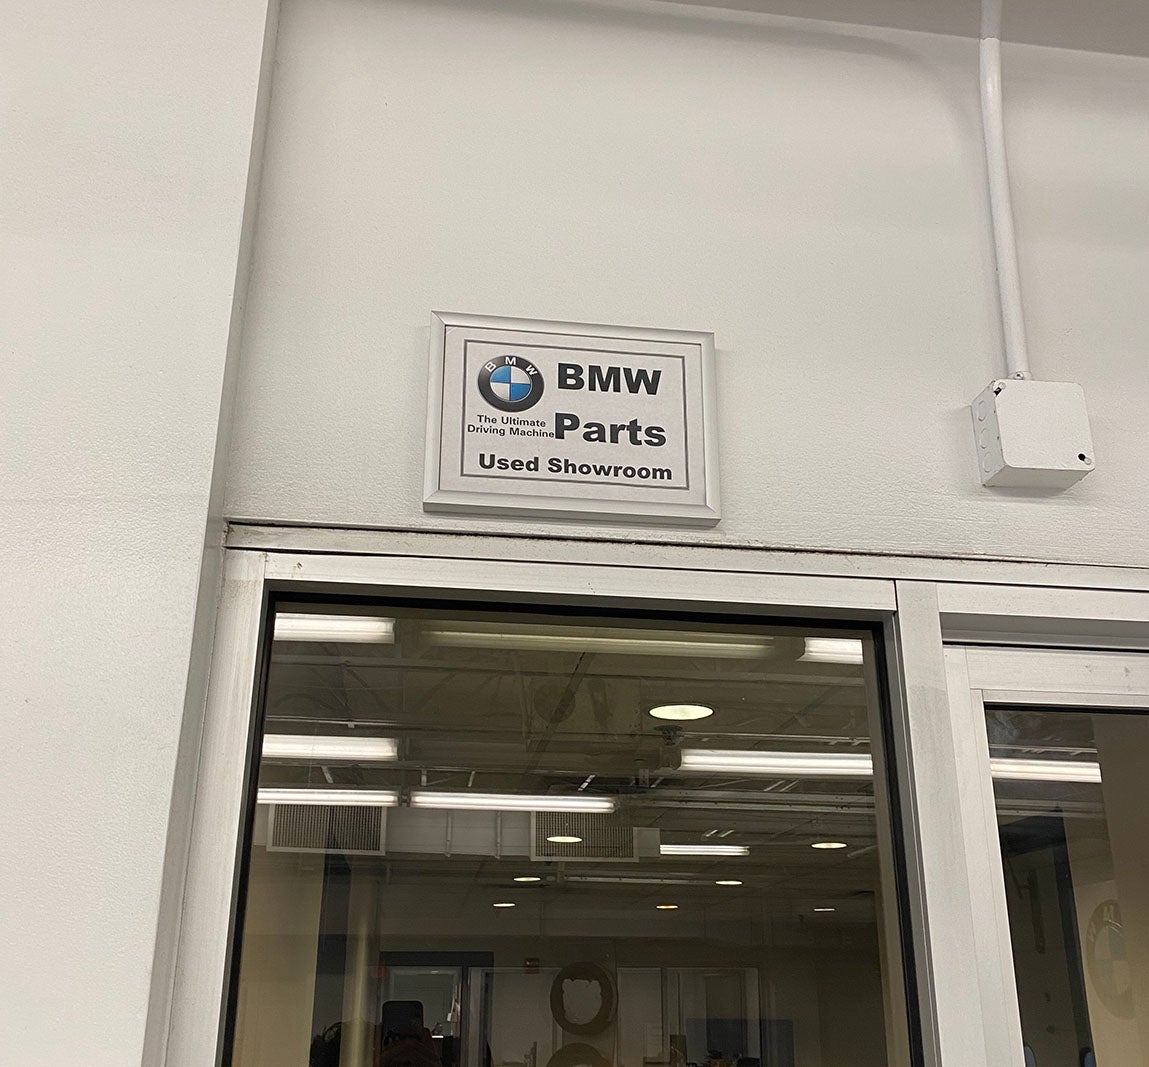 Our BMW service center in Dayton, OH